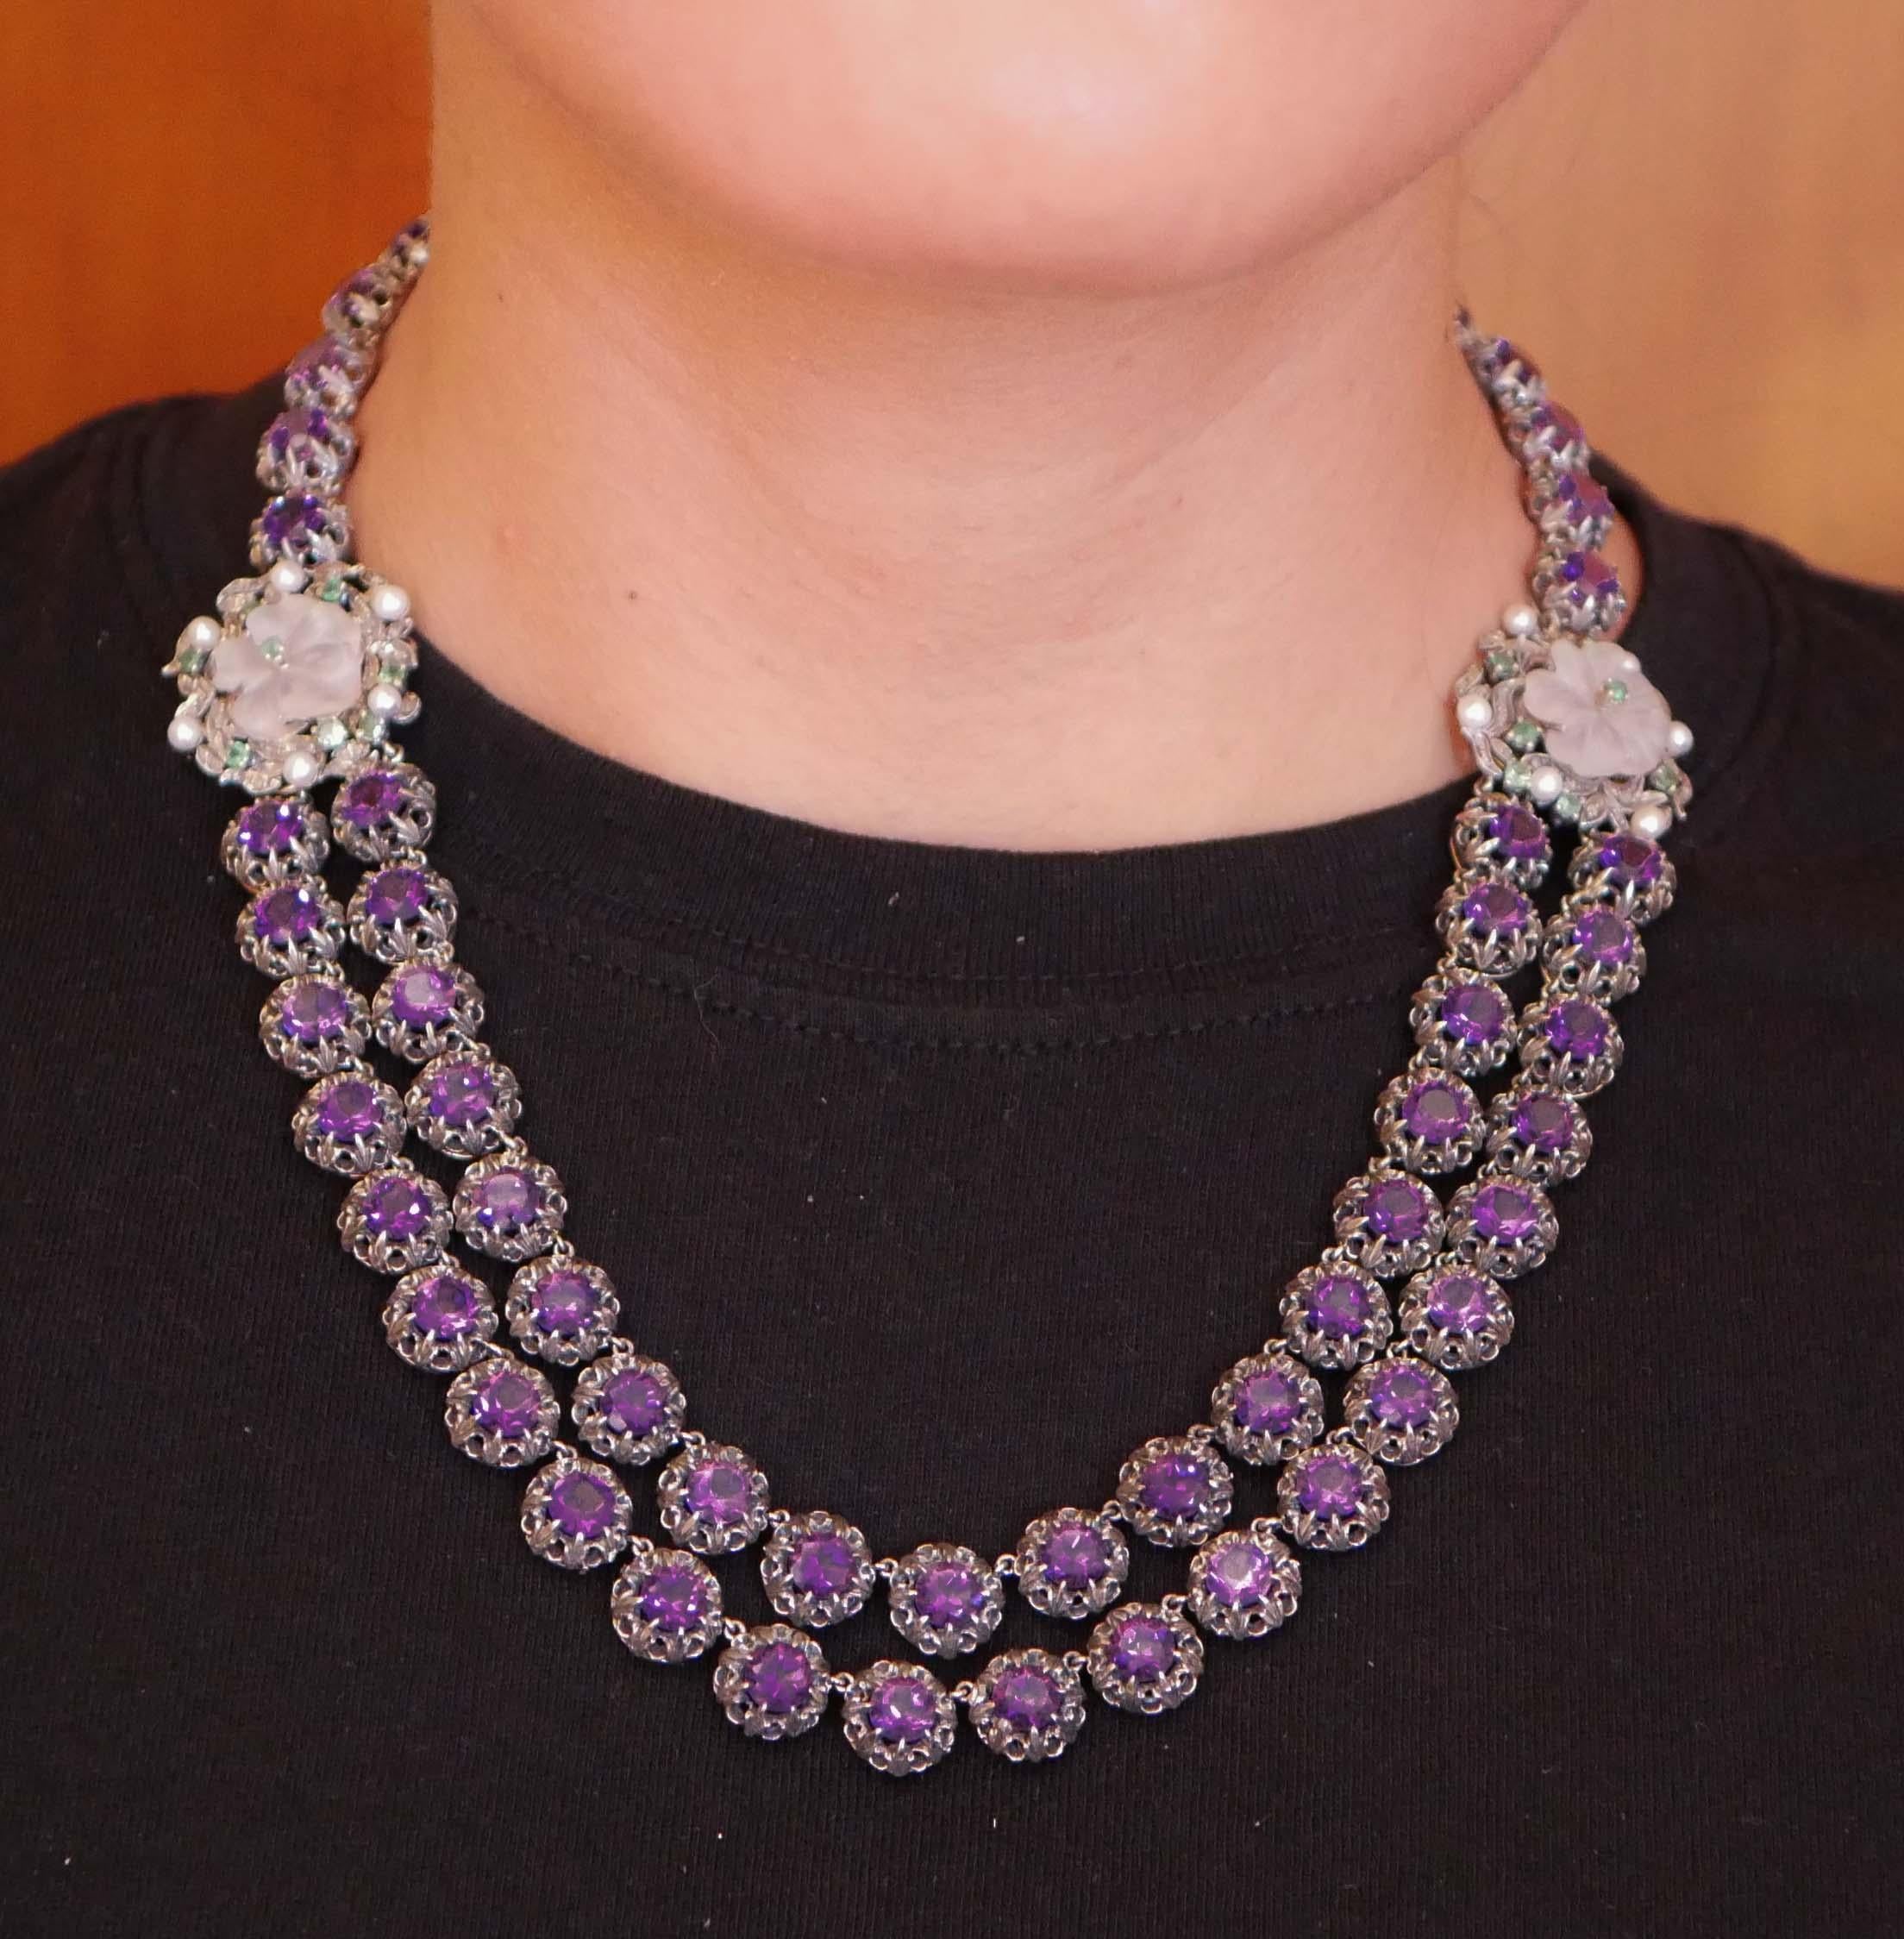 Women's Amethysts, Tsavorite, Rock Crystal, Diamonds, Pearls, Gold and Silver Necklace. For Sale